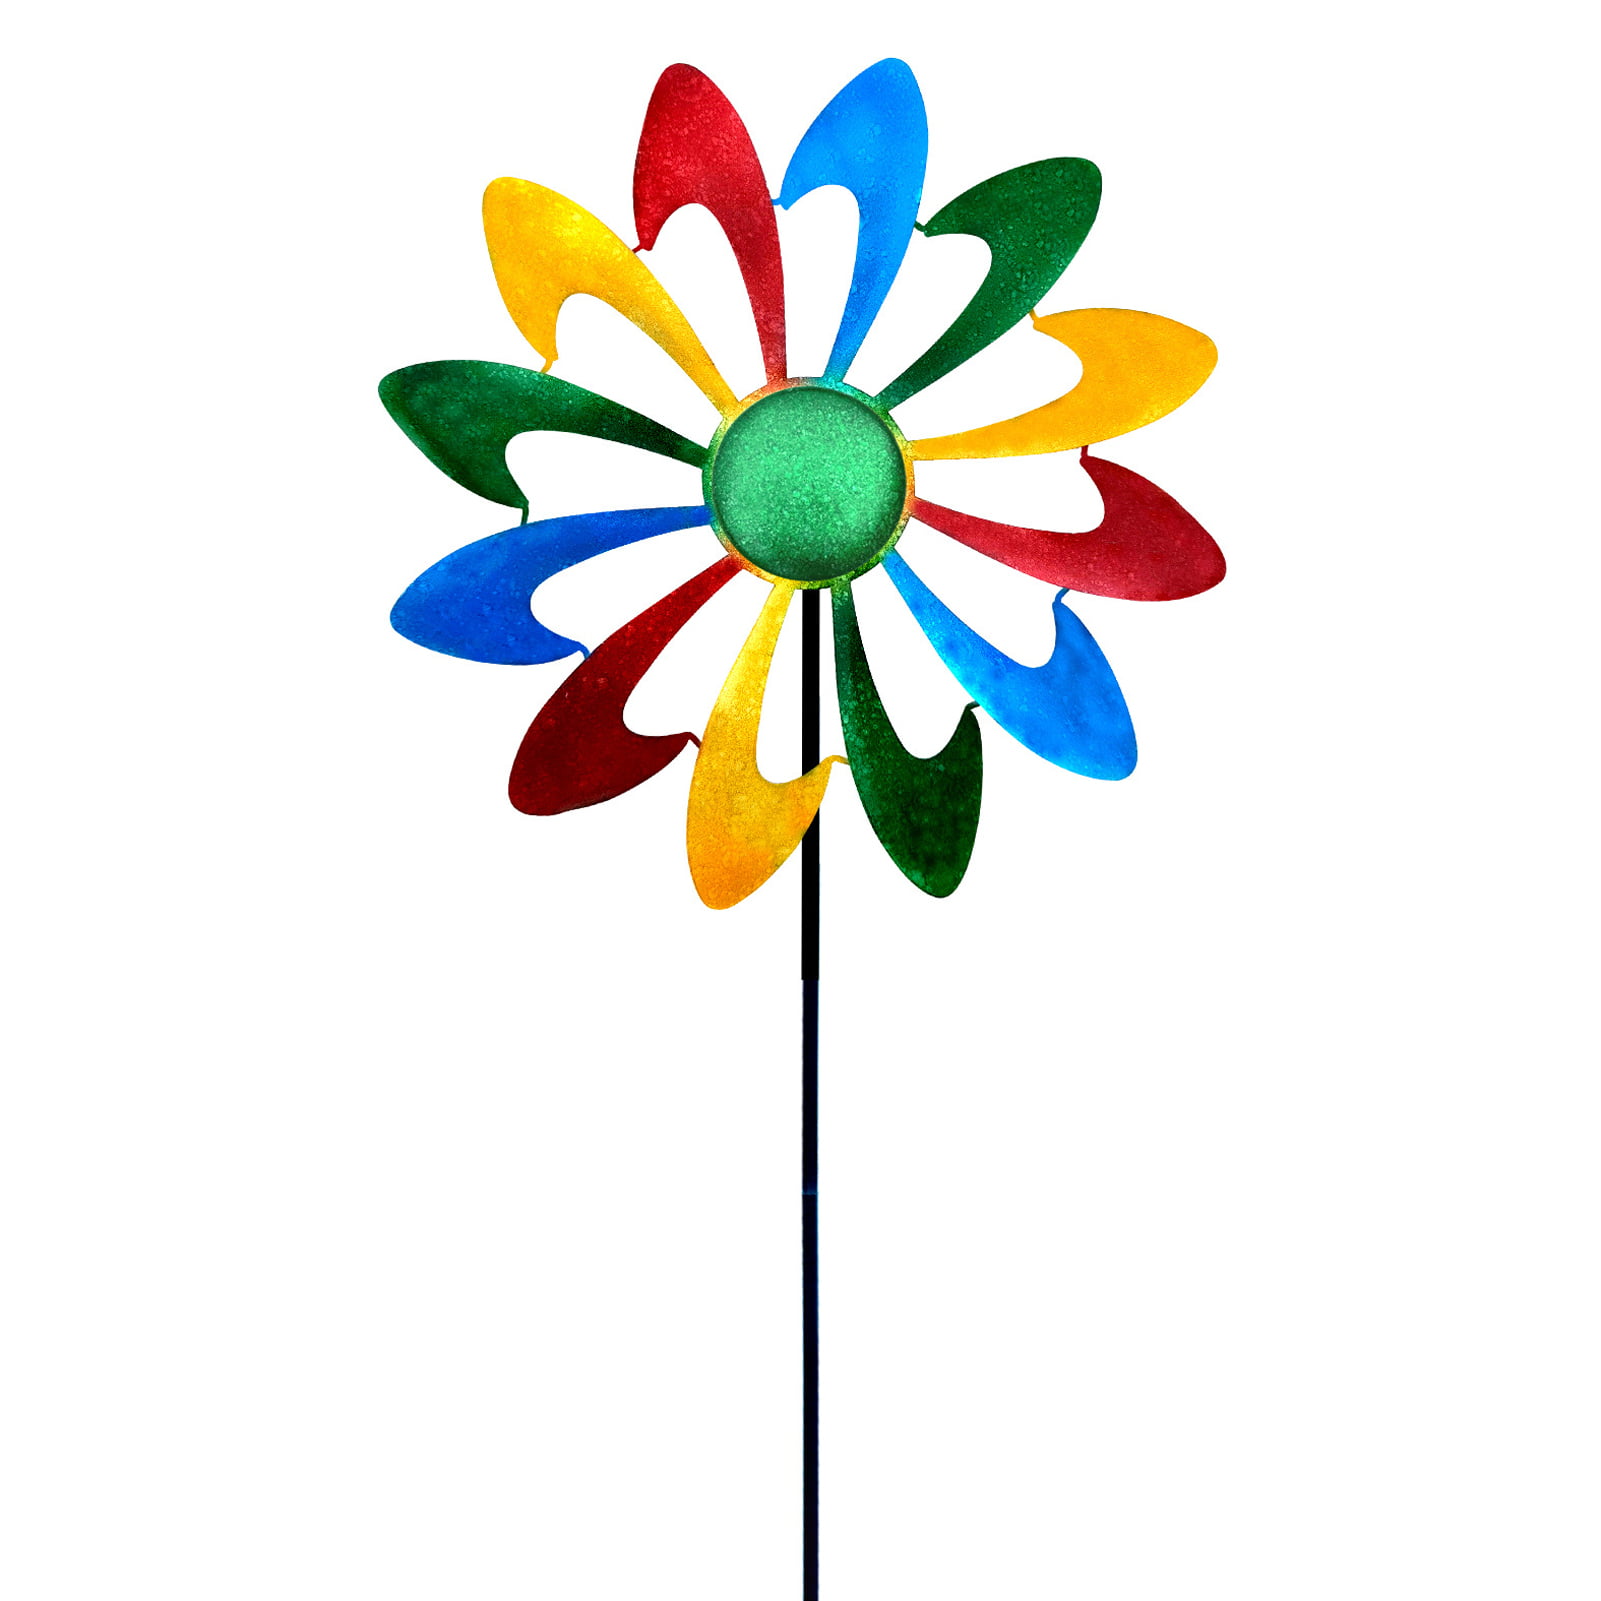 Colorful Metal Double Wind Spinner Stake Outdoor Yard Garden Home Art Decor 5' 